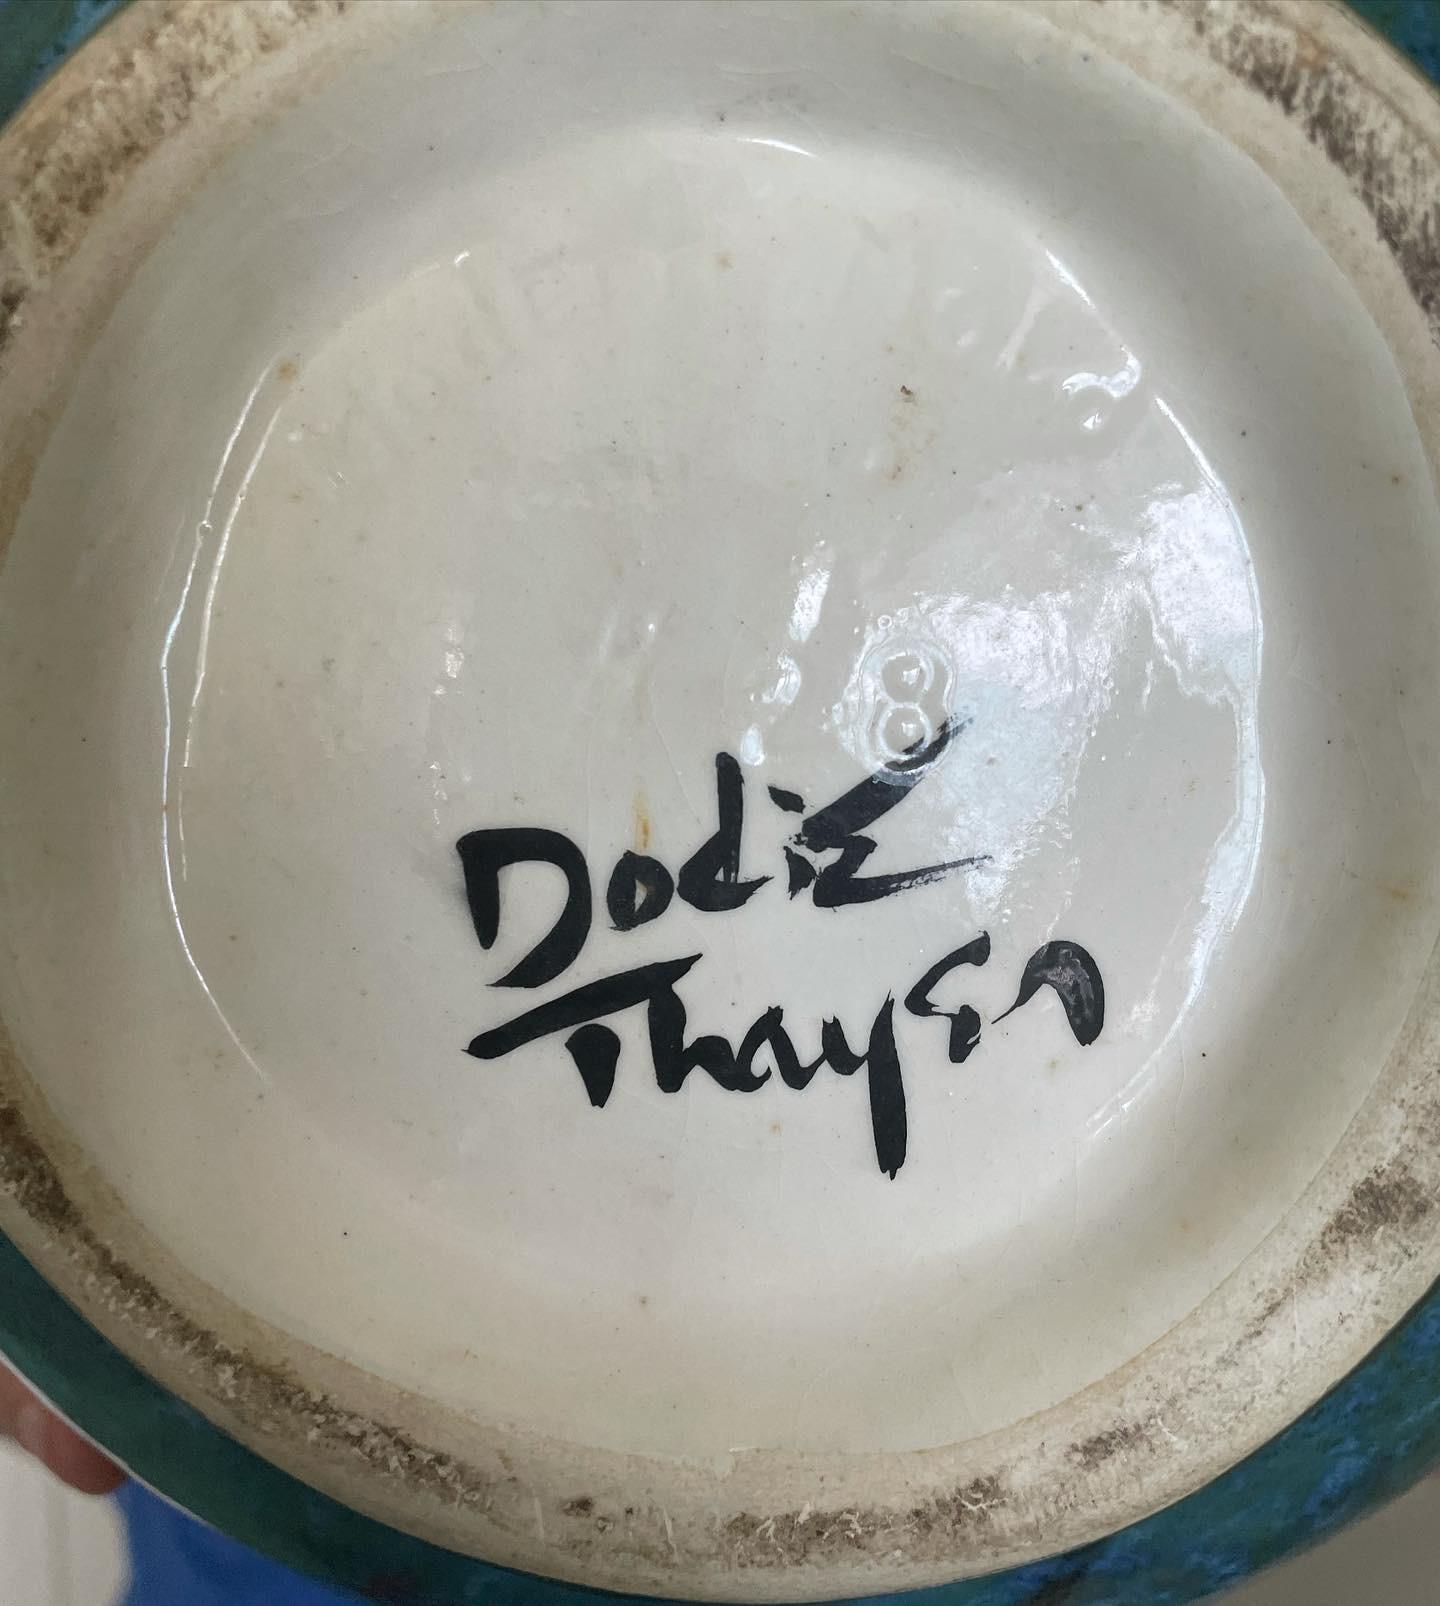 American Dodie Thayer, The Queen Of Pottery Palm Beach' 60's, Pottery Ginger Jars